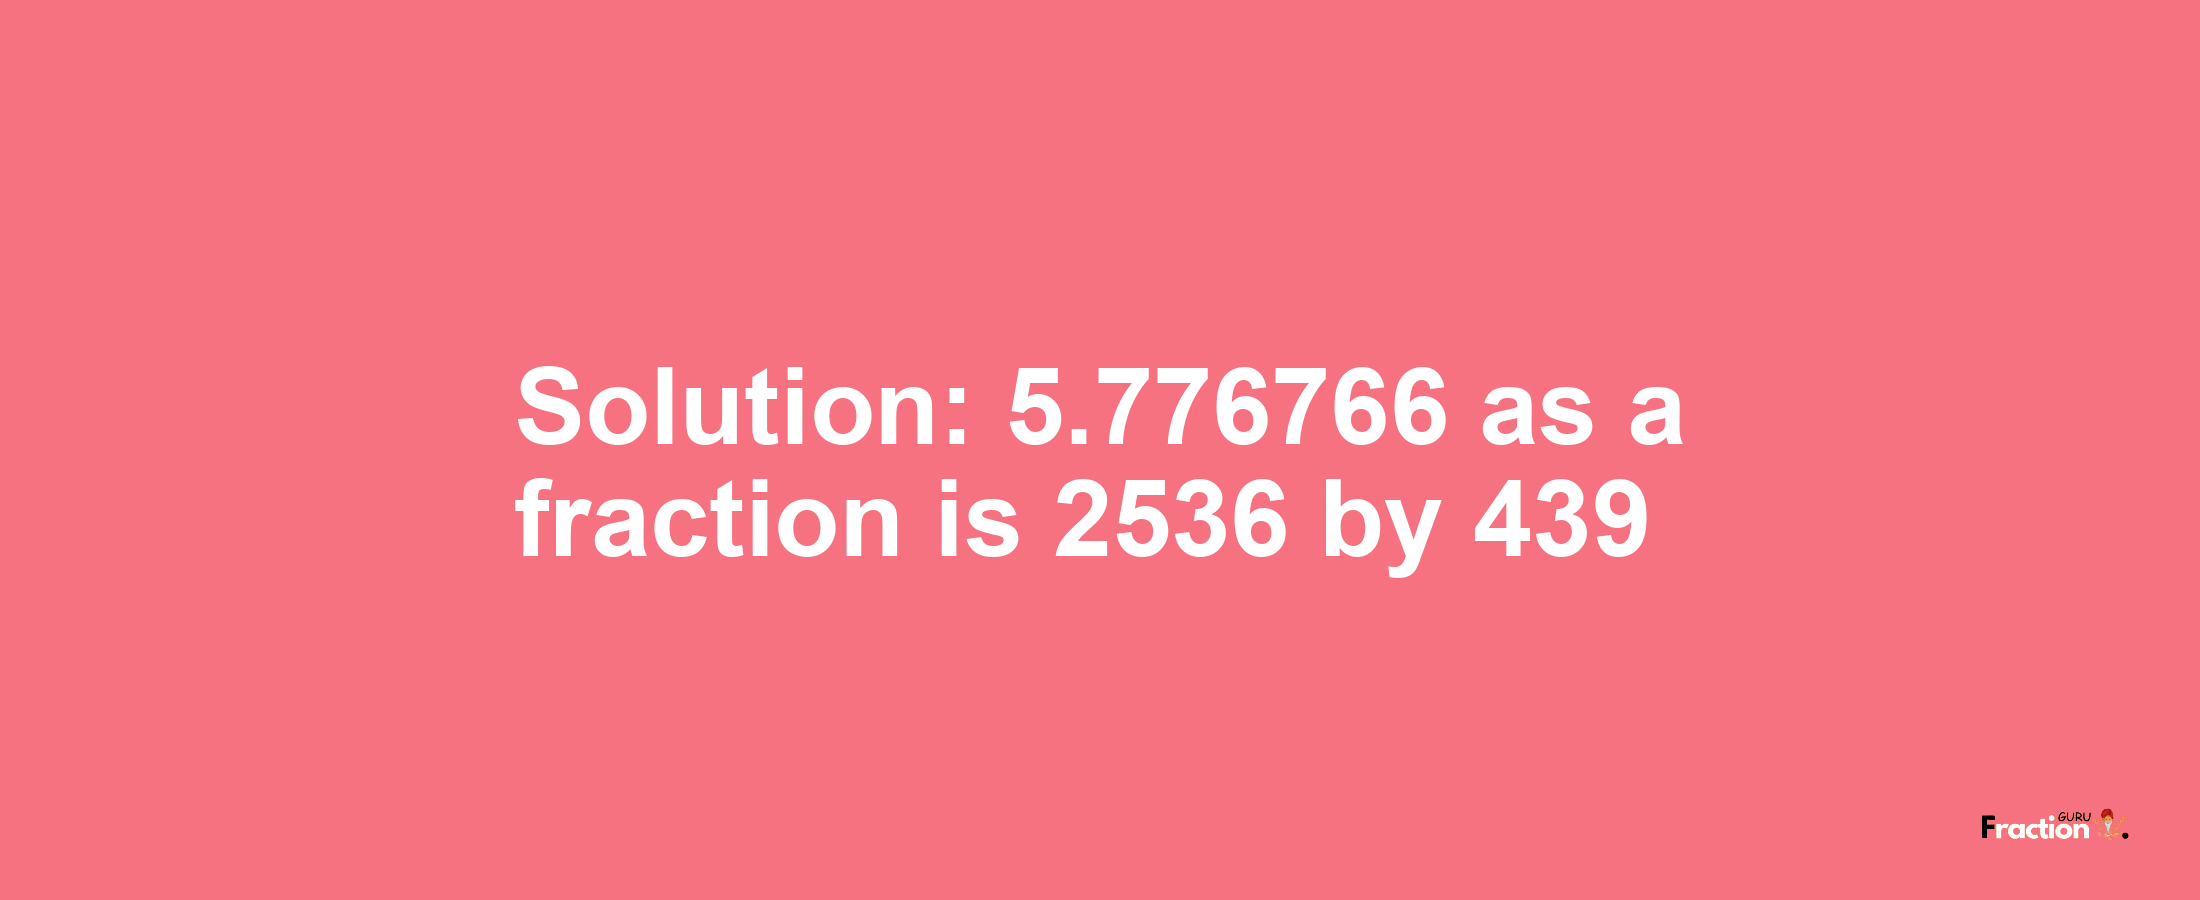 Solution:5.776766 as a fraction is 2536/439